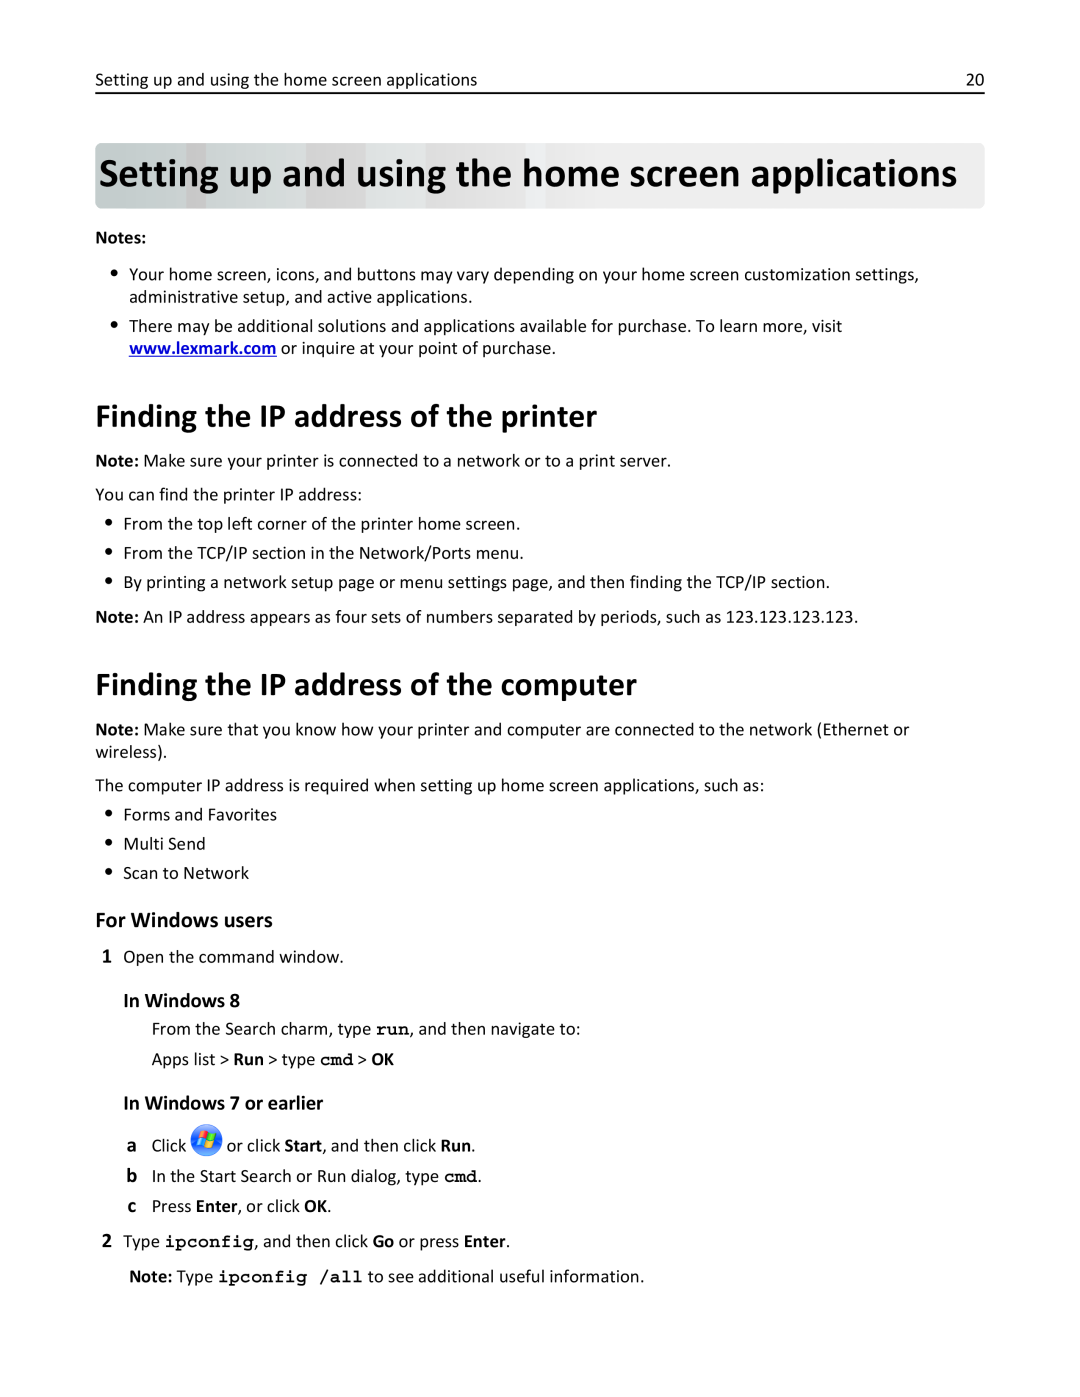 Lexmark MX710DHE Setting upand using thehome screen applications, Finding the IP address of the printer, For Windows users 